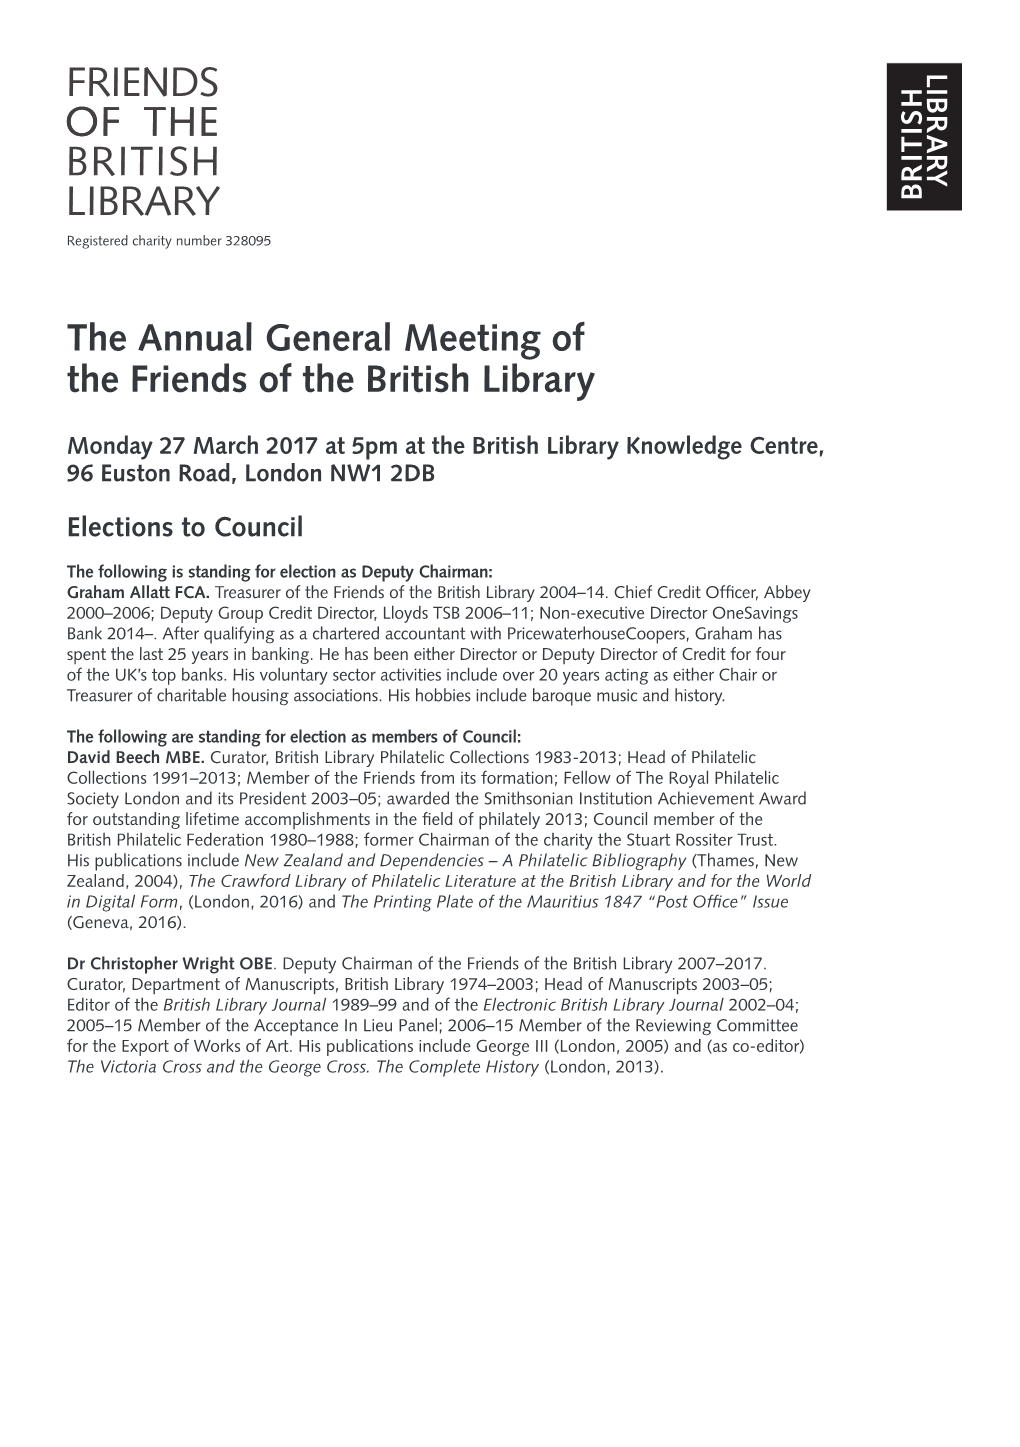 The Annual General Meeting of the Friends of the British Library